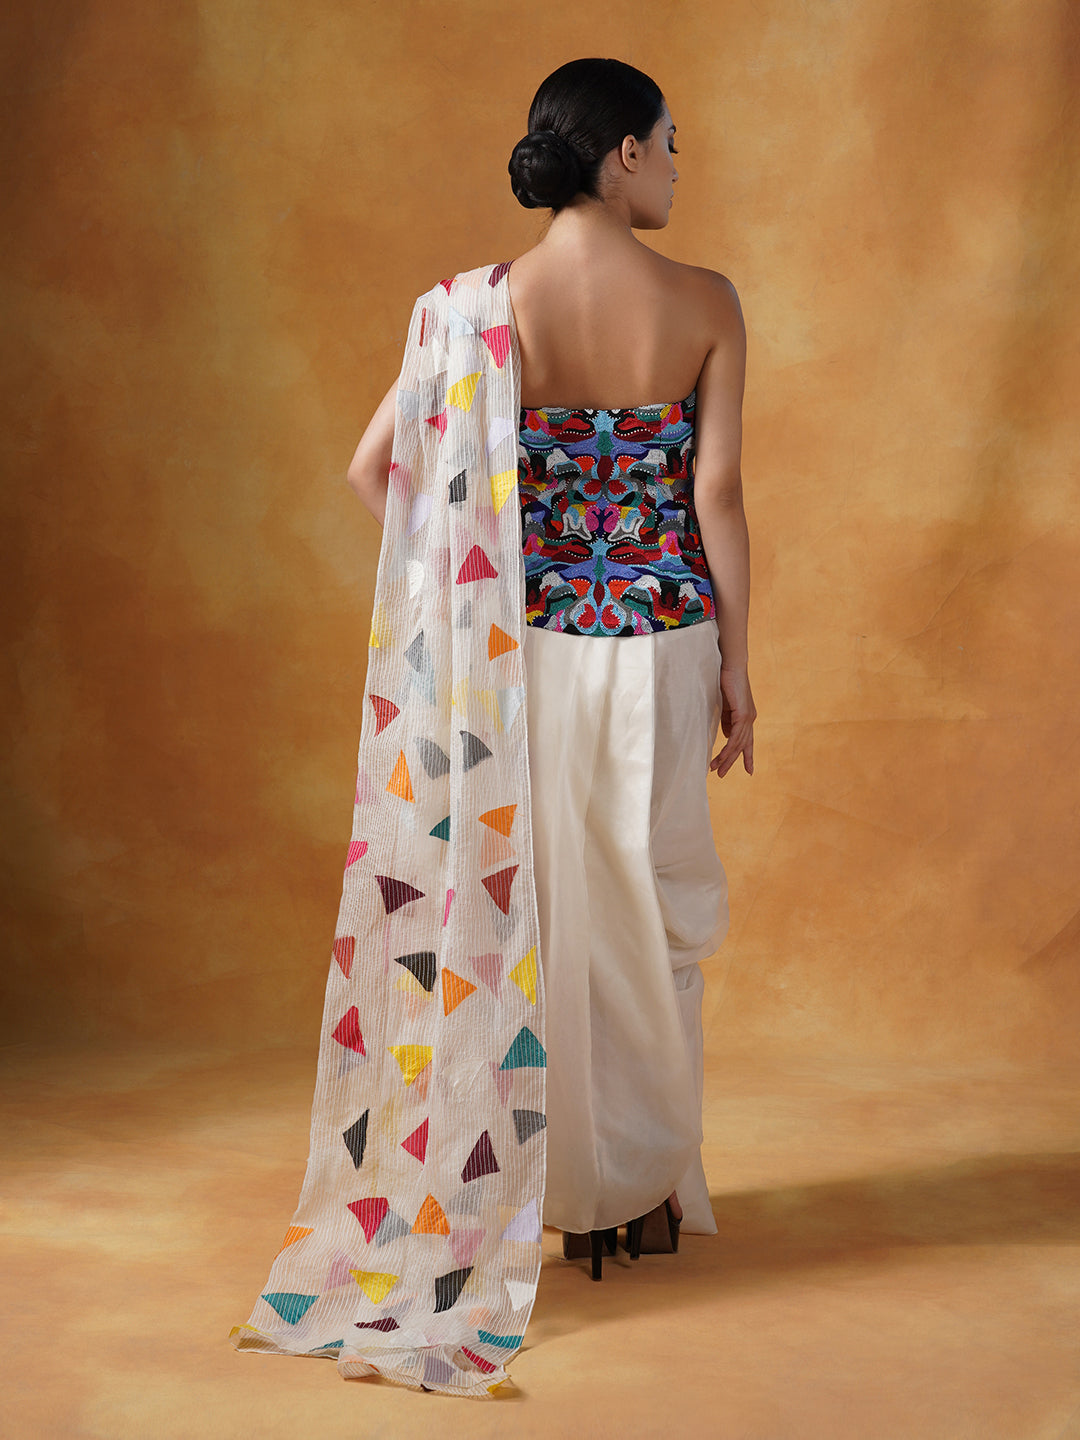 Corset that is intricately embroidered in colorful beads, decorated with a printed pallu and is paired with a plain white cotton silk drape skirt.